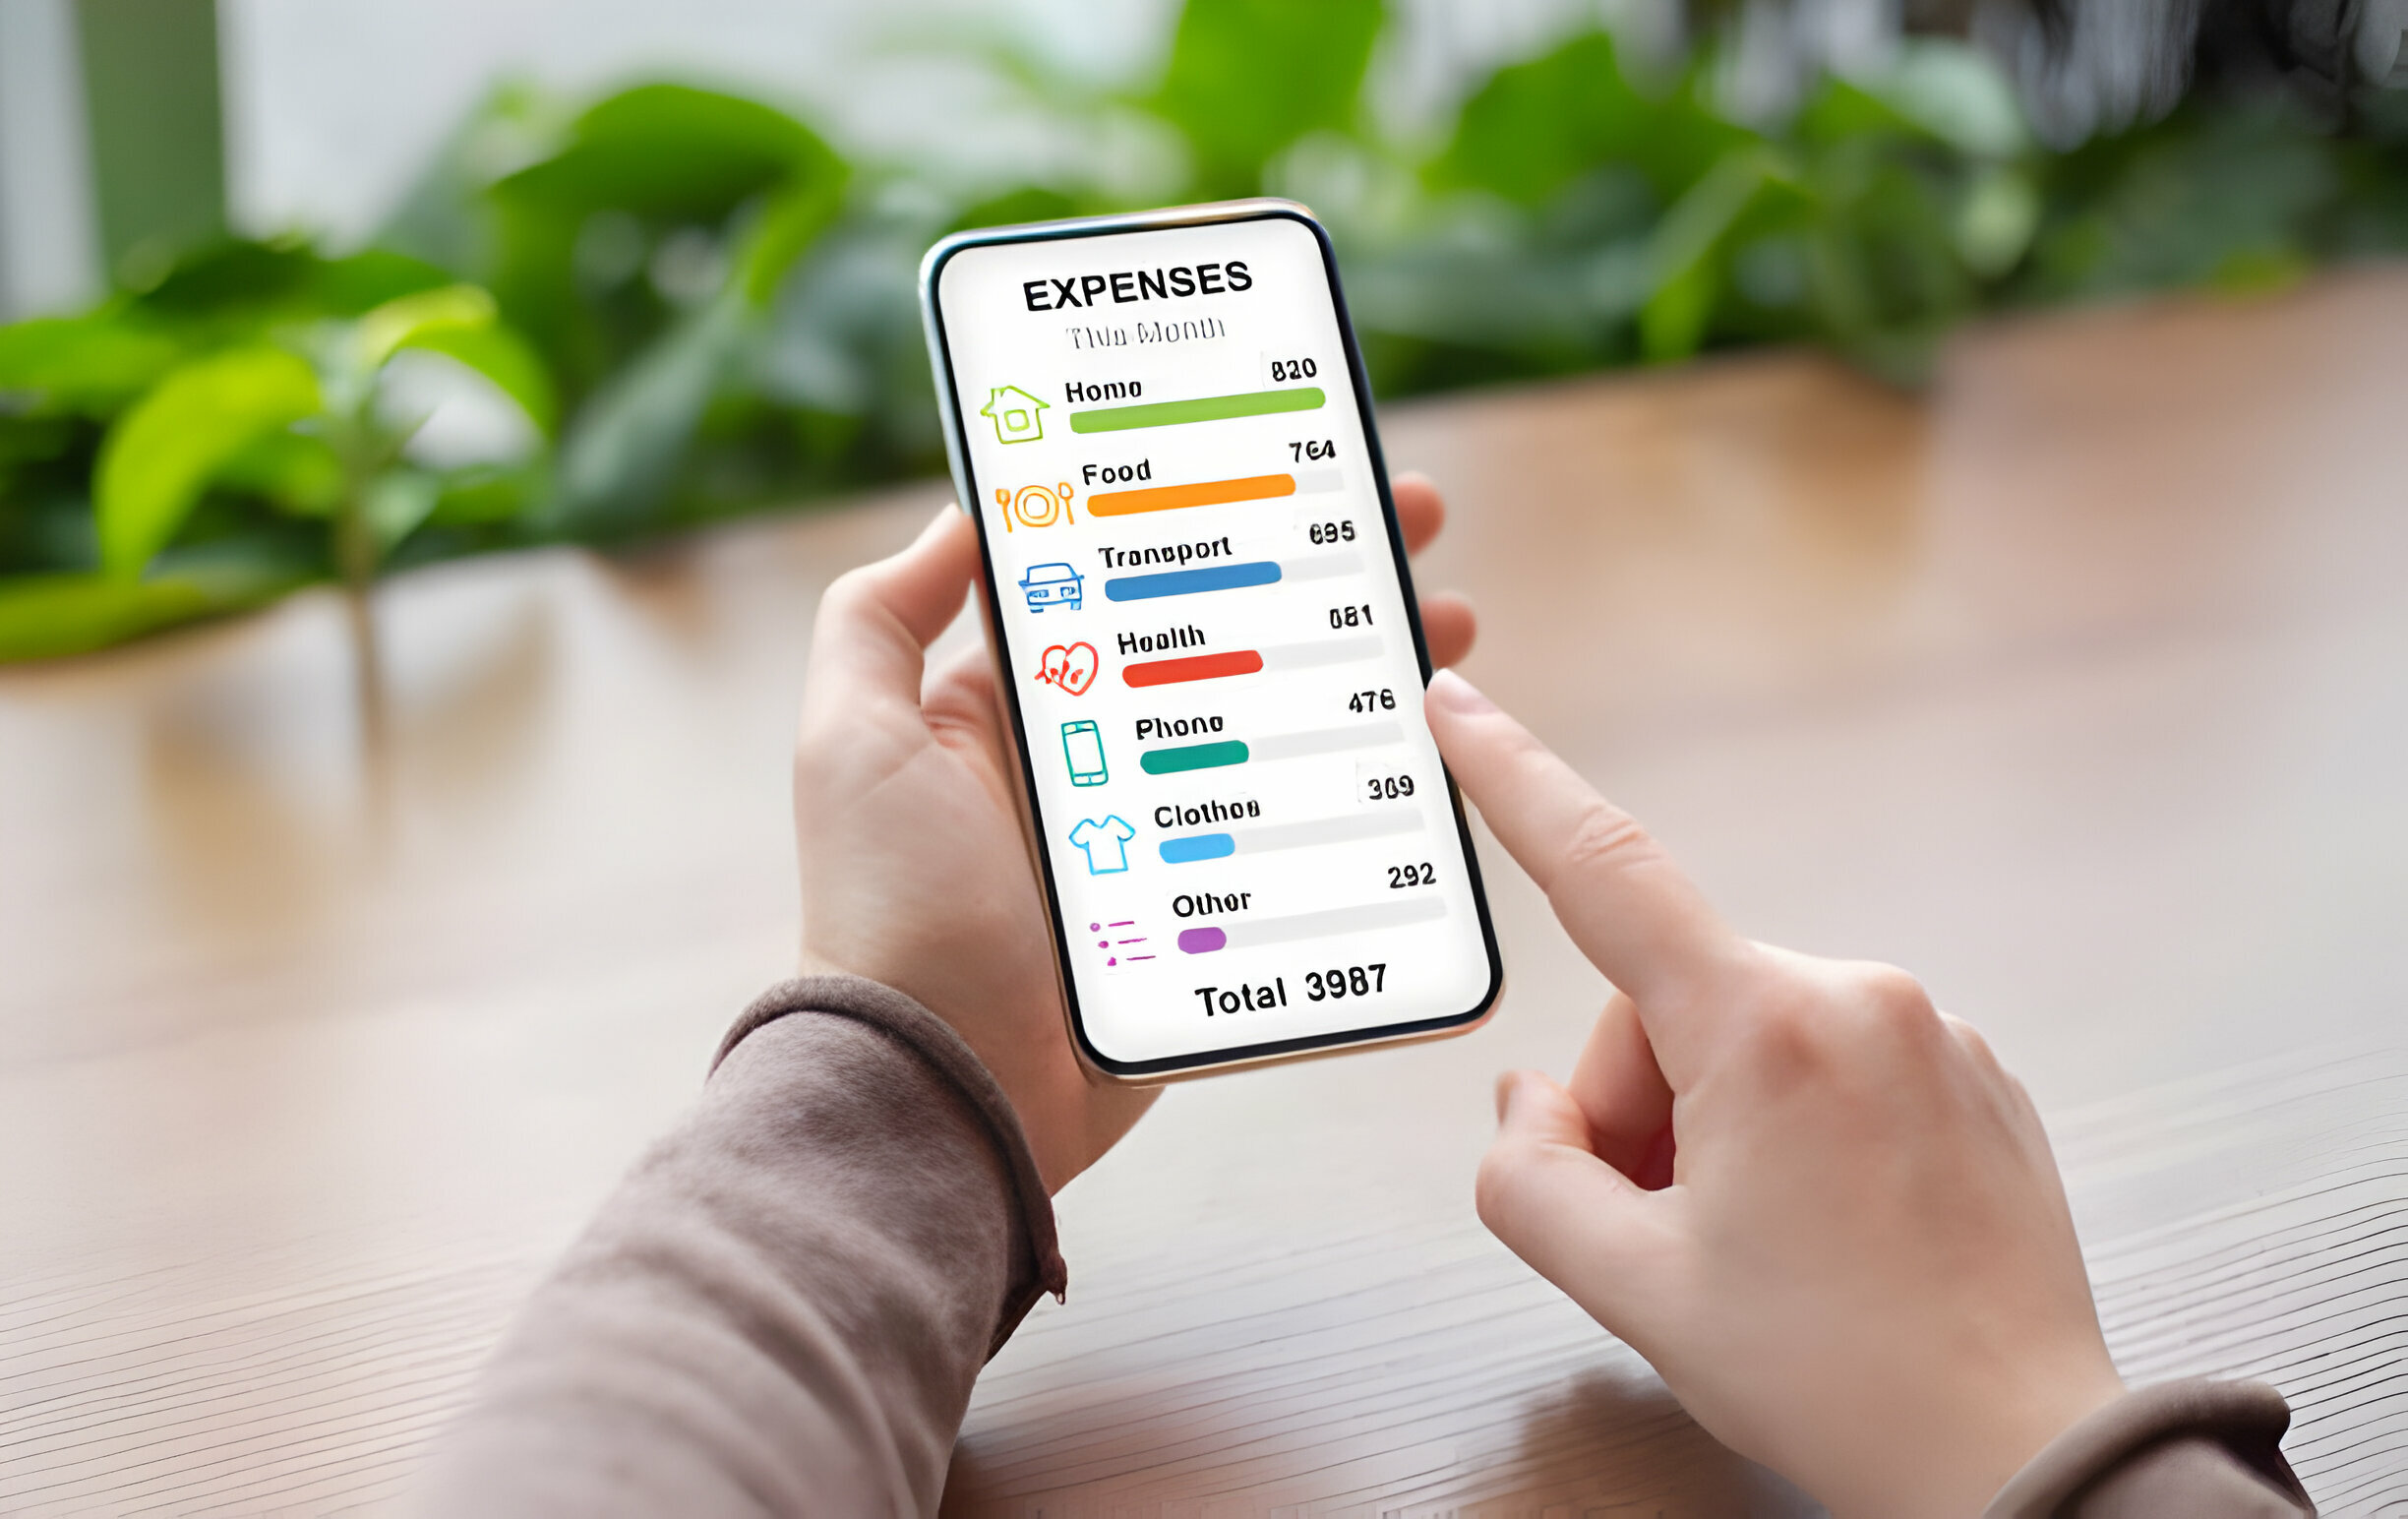 Potential Top Apps to Help Track Expenses and Pay Bills on Time